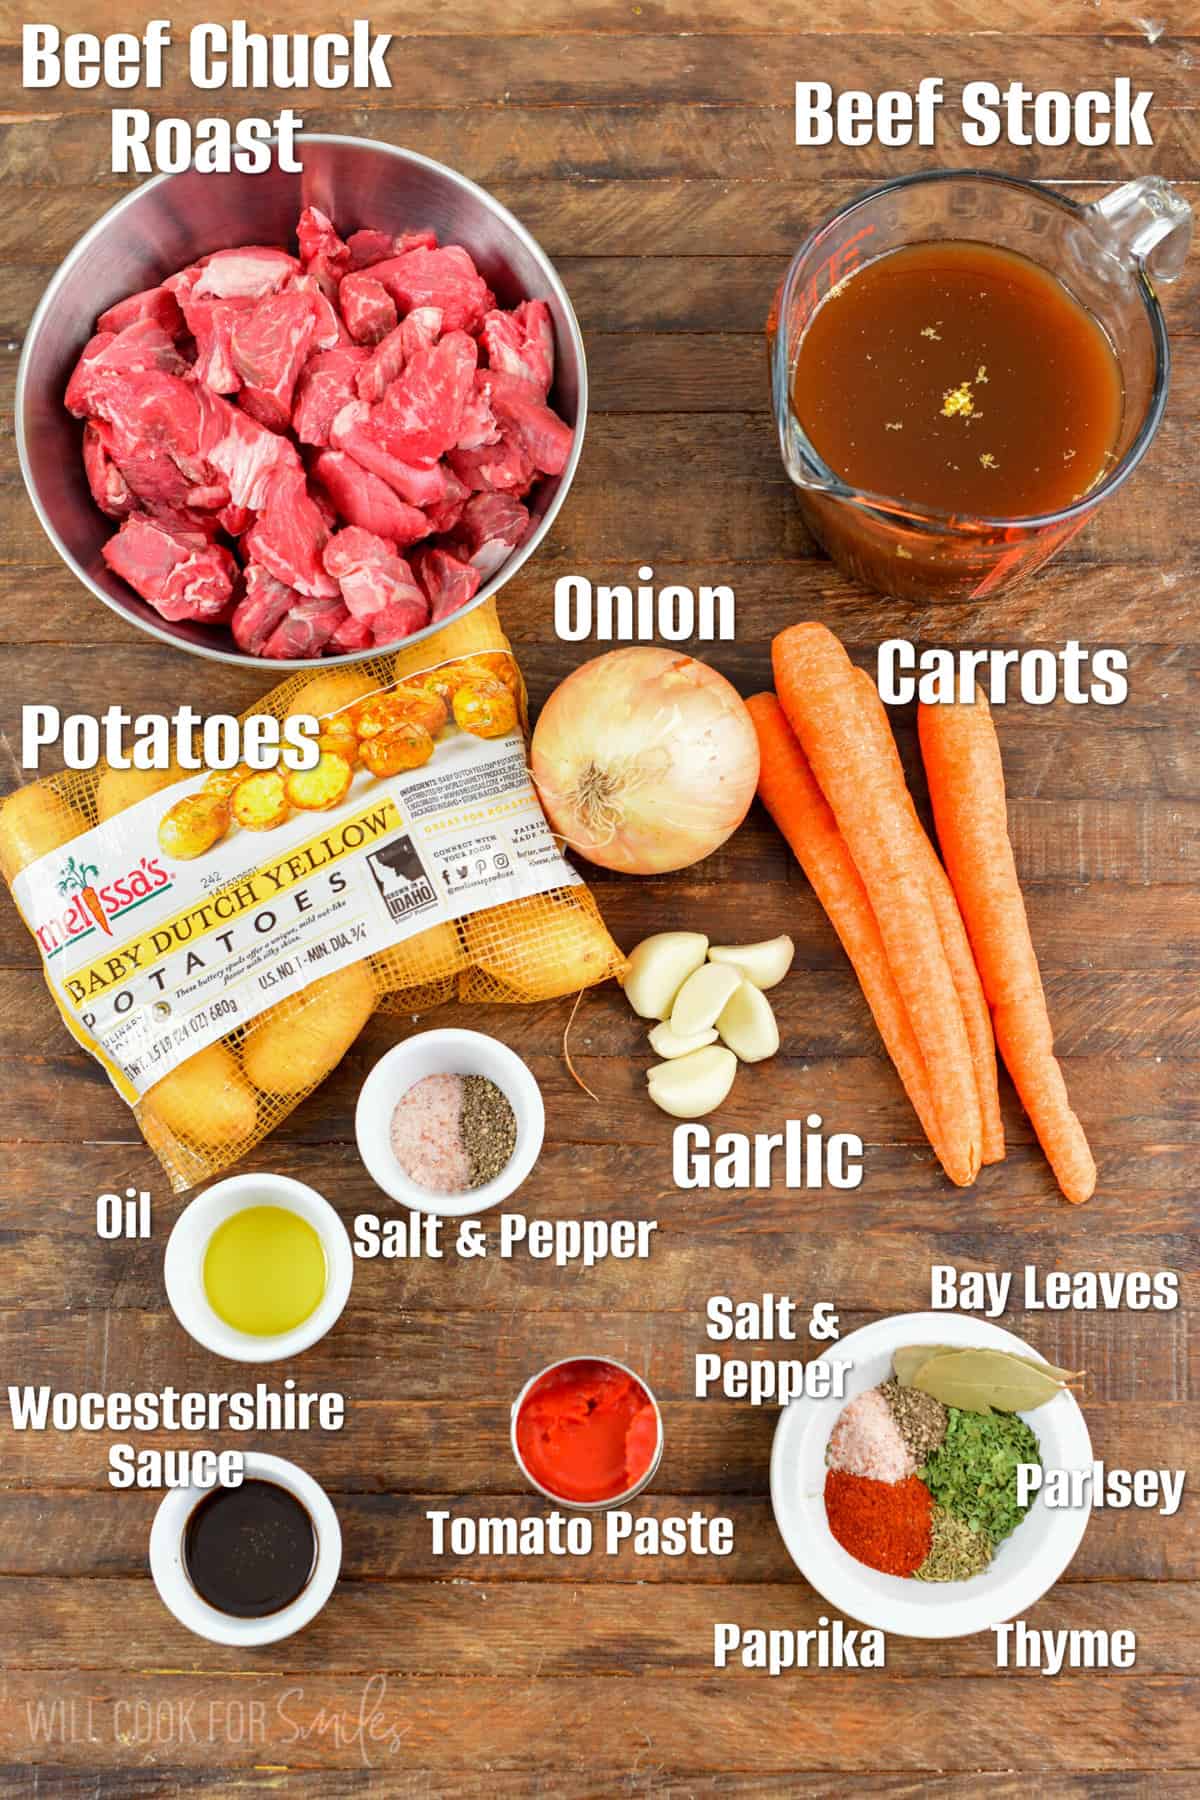 Labeled ingredients for beef stew on a wood surface.